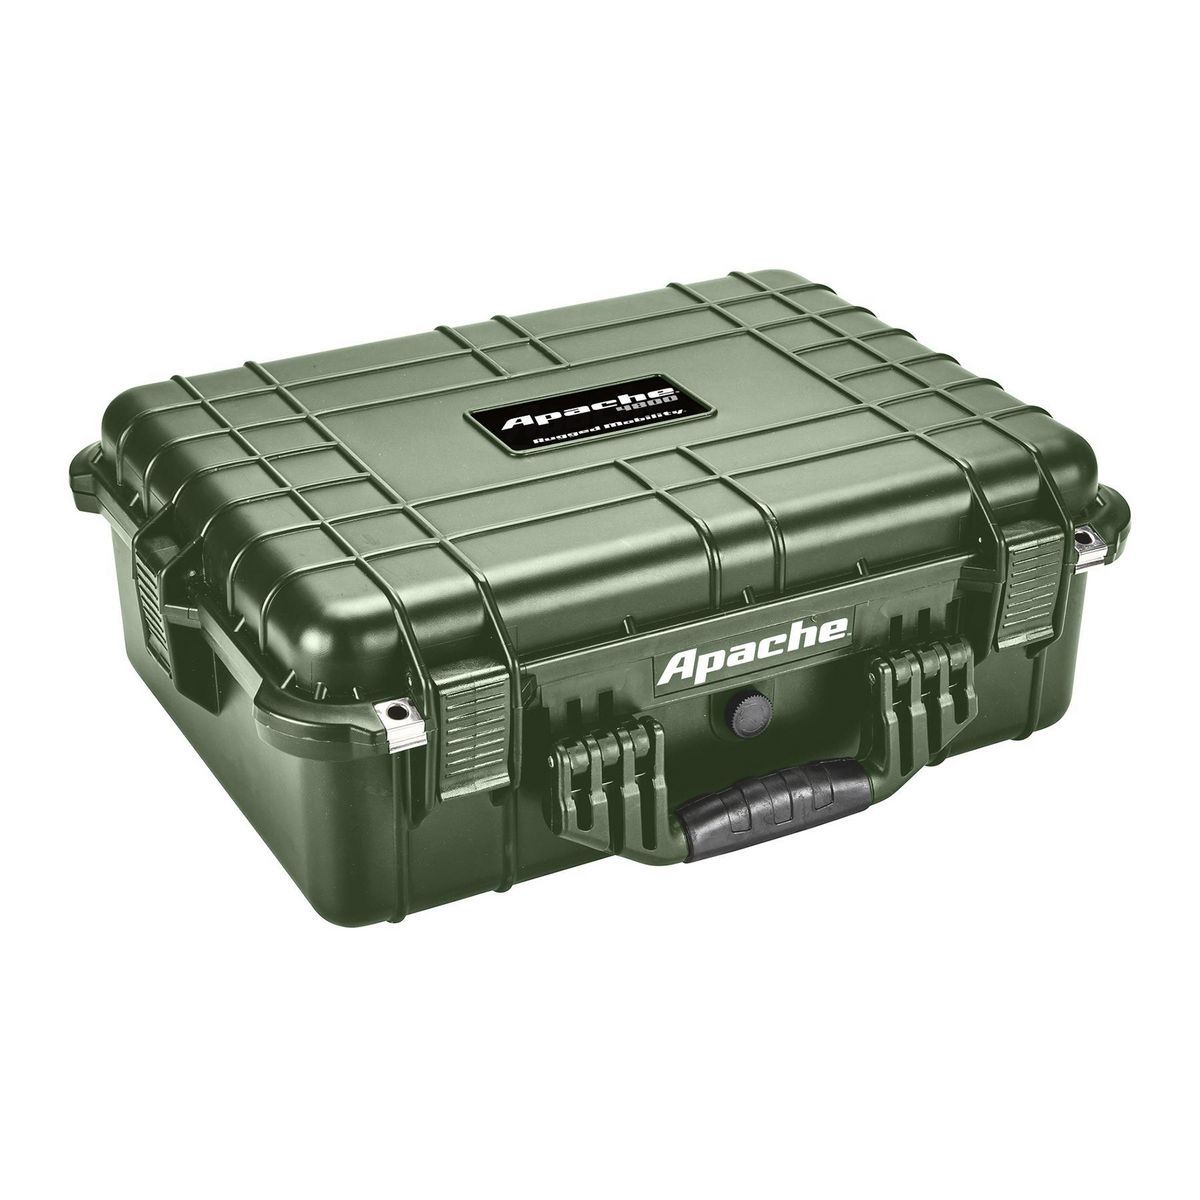 Green Apache 4800 Weatherproof Protective Case, X-Large, Watertight, dust-tight, impact resistant protective case